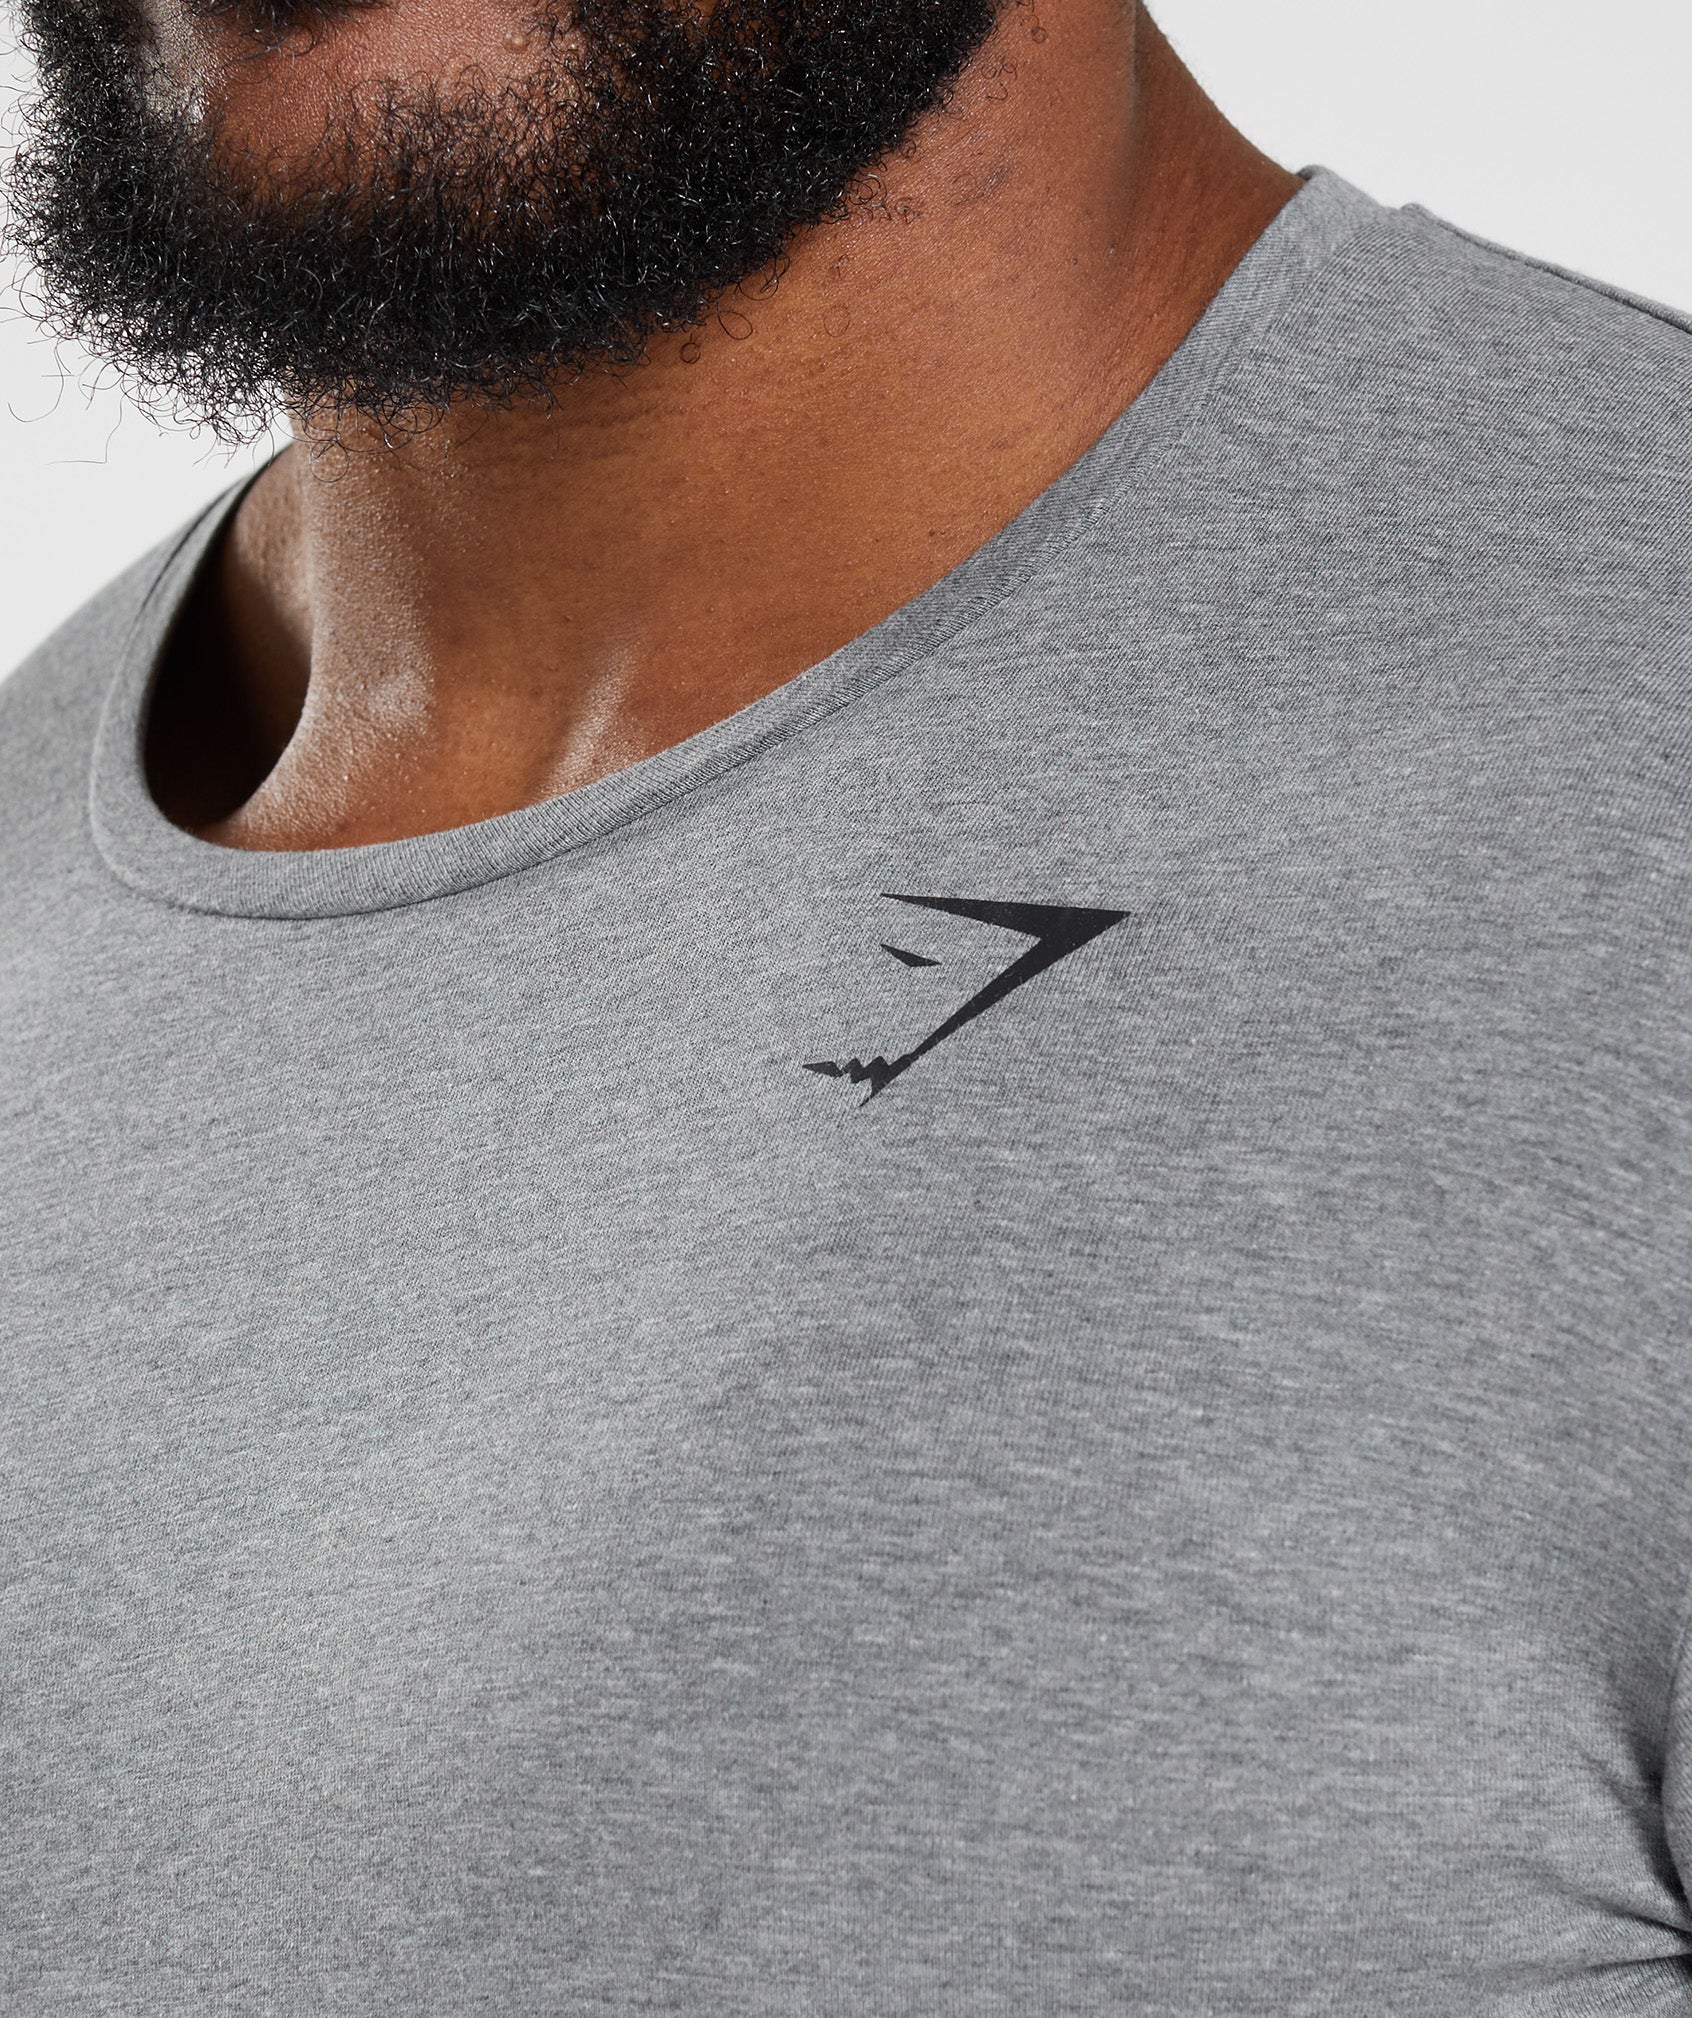 Essential T-Shirt in Charcoal Grey Marl